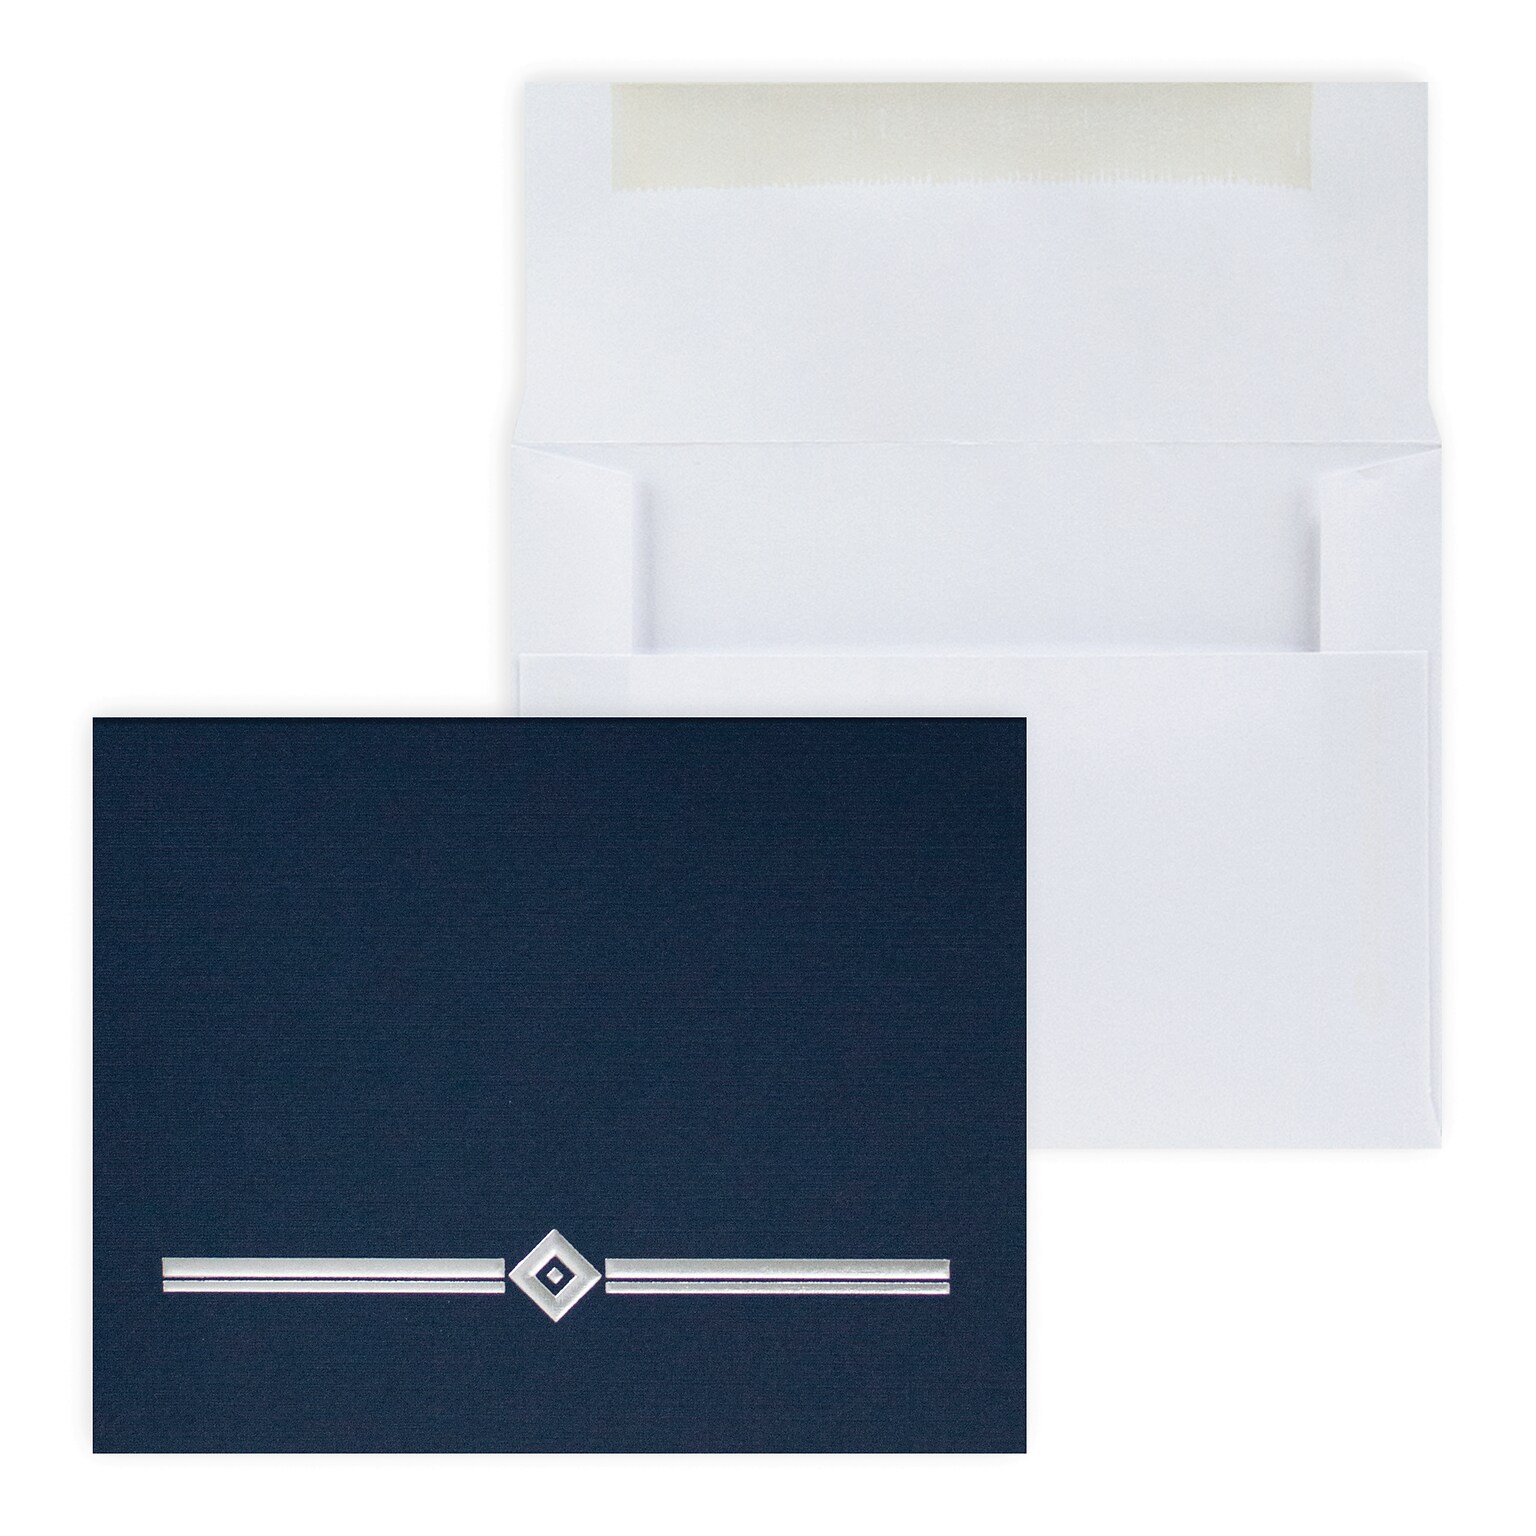 Custom Decorative Line with Foil Greeting Cards, With Envelopes, 4-1/4 x 5-3/8, 25 Cards per Set